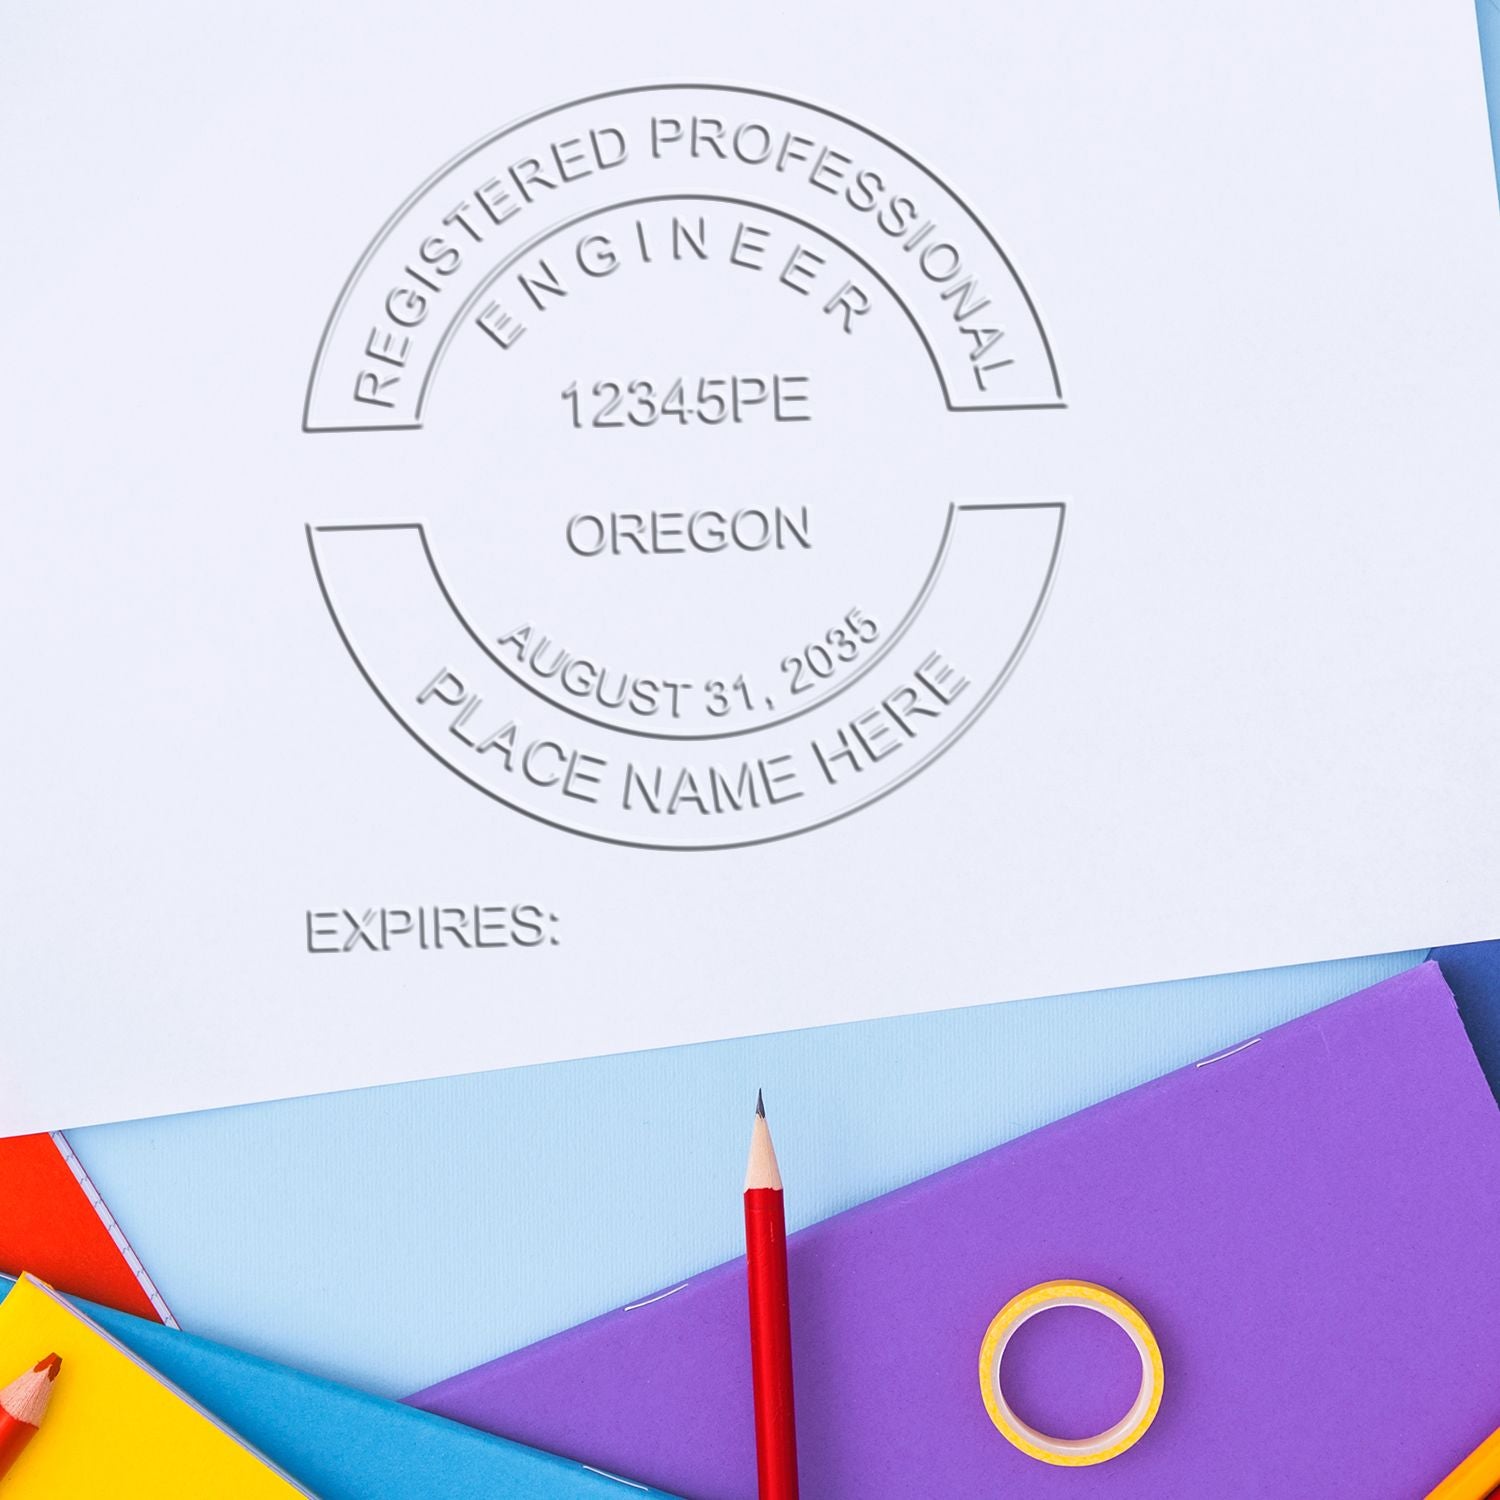 A stamped impression of the Soft Oregon Professional Engineer Seal in this stylish lifestyle photo, setting the tone for a unique and personalized product.